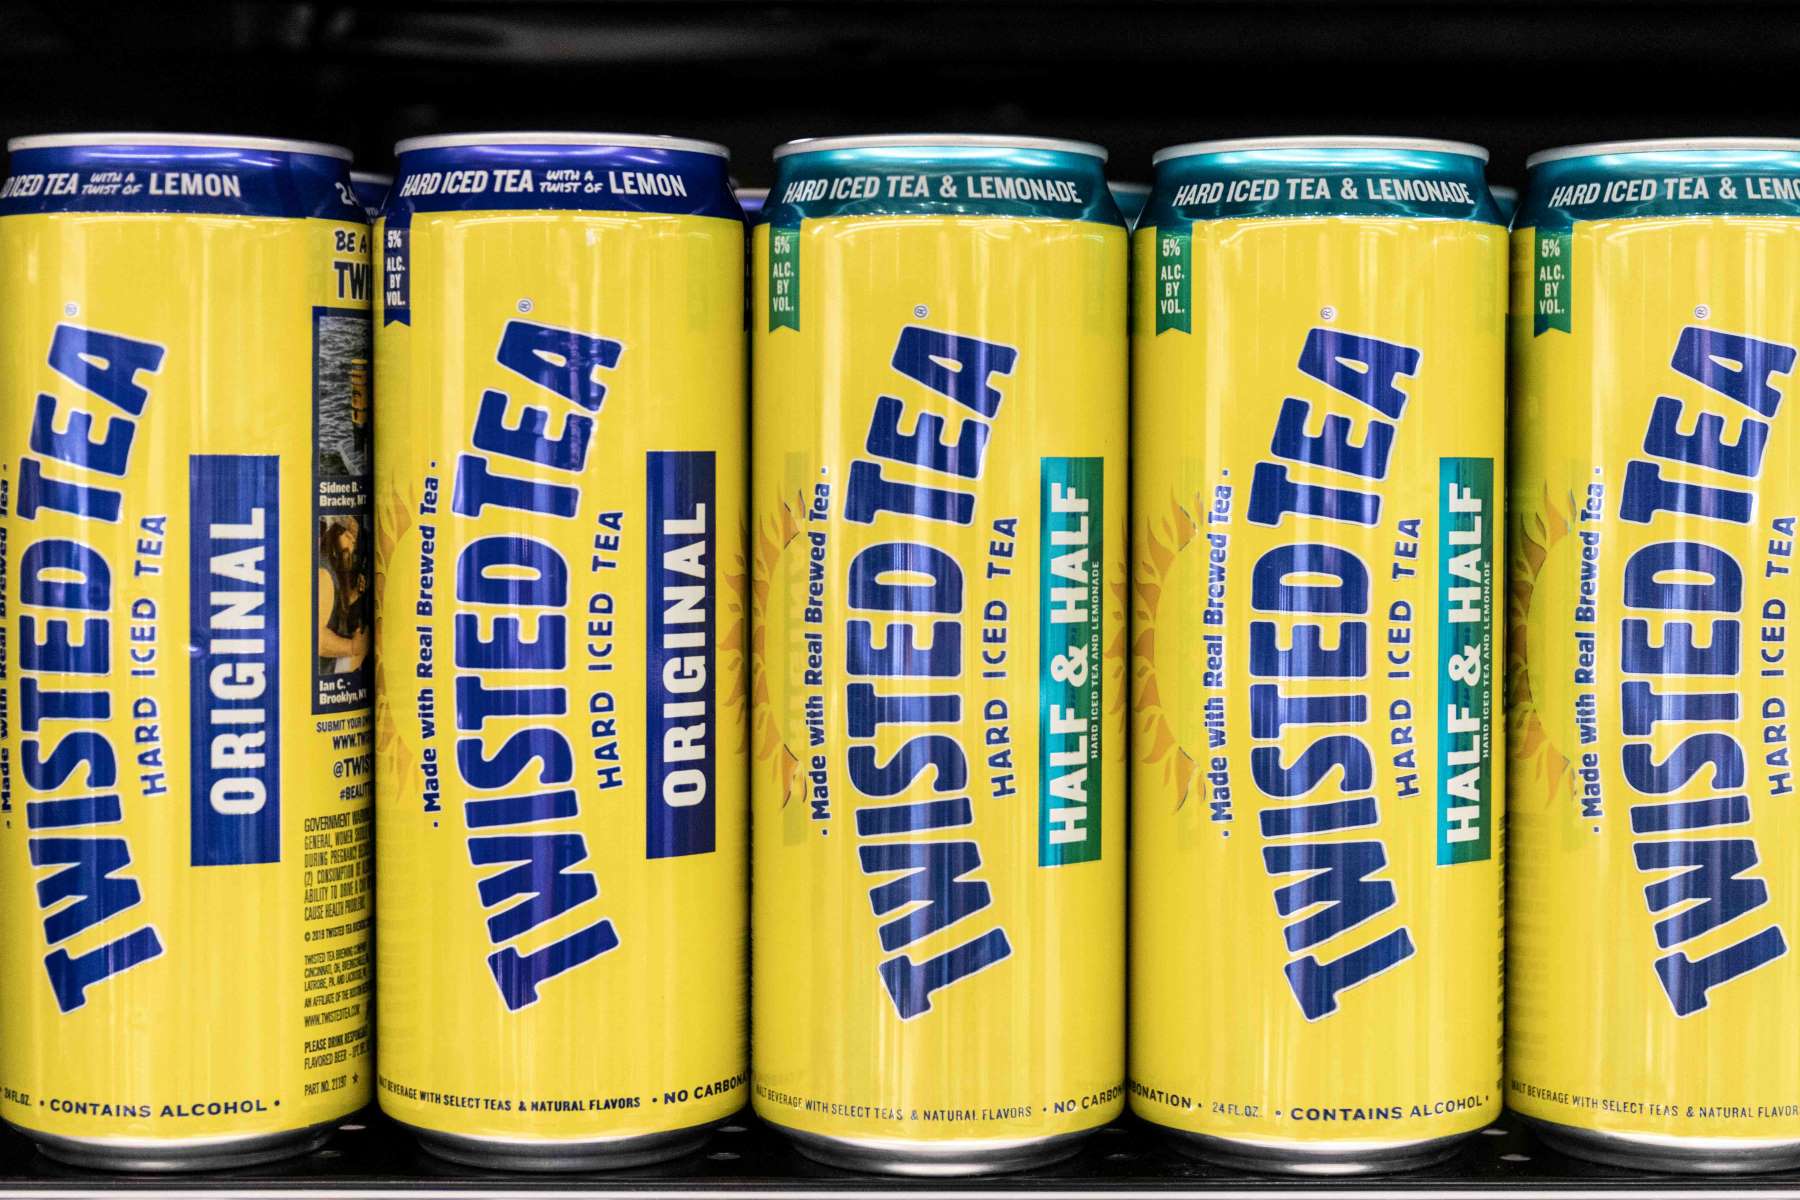 The Surprising Sugar Used In Twisted Tea!